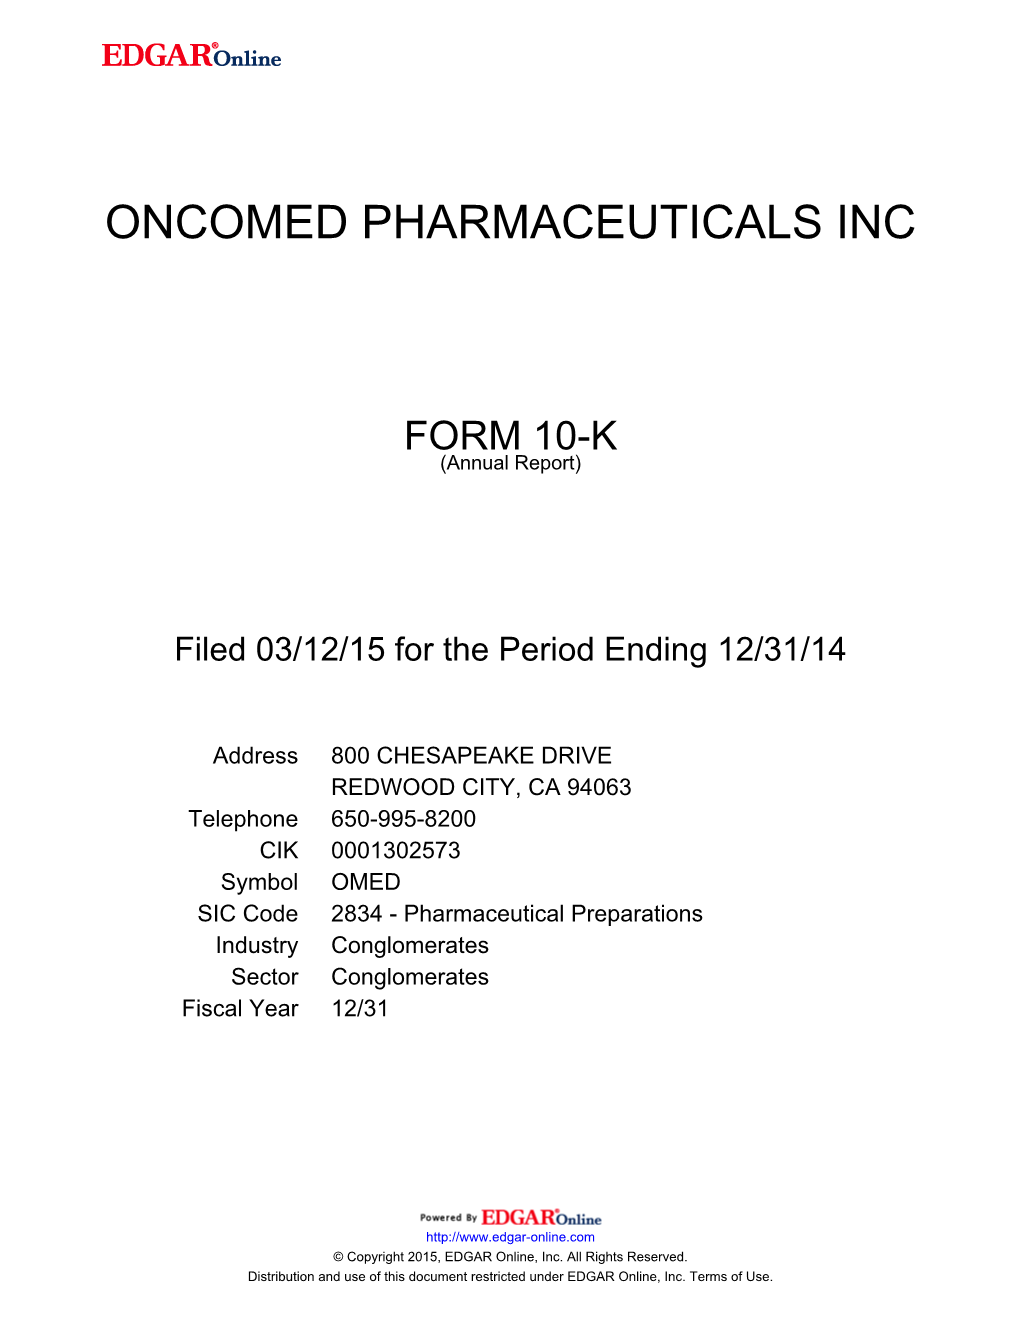 Oncomed Pharmaceuticals Inc